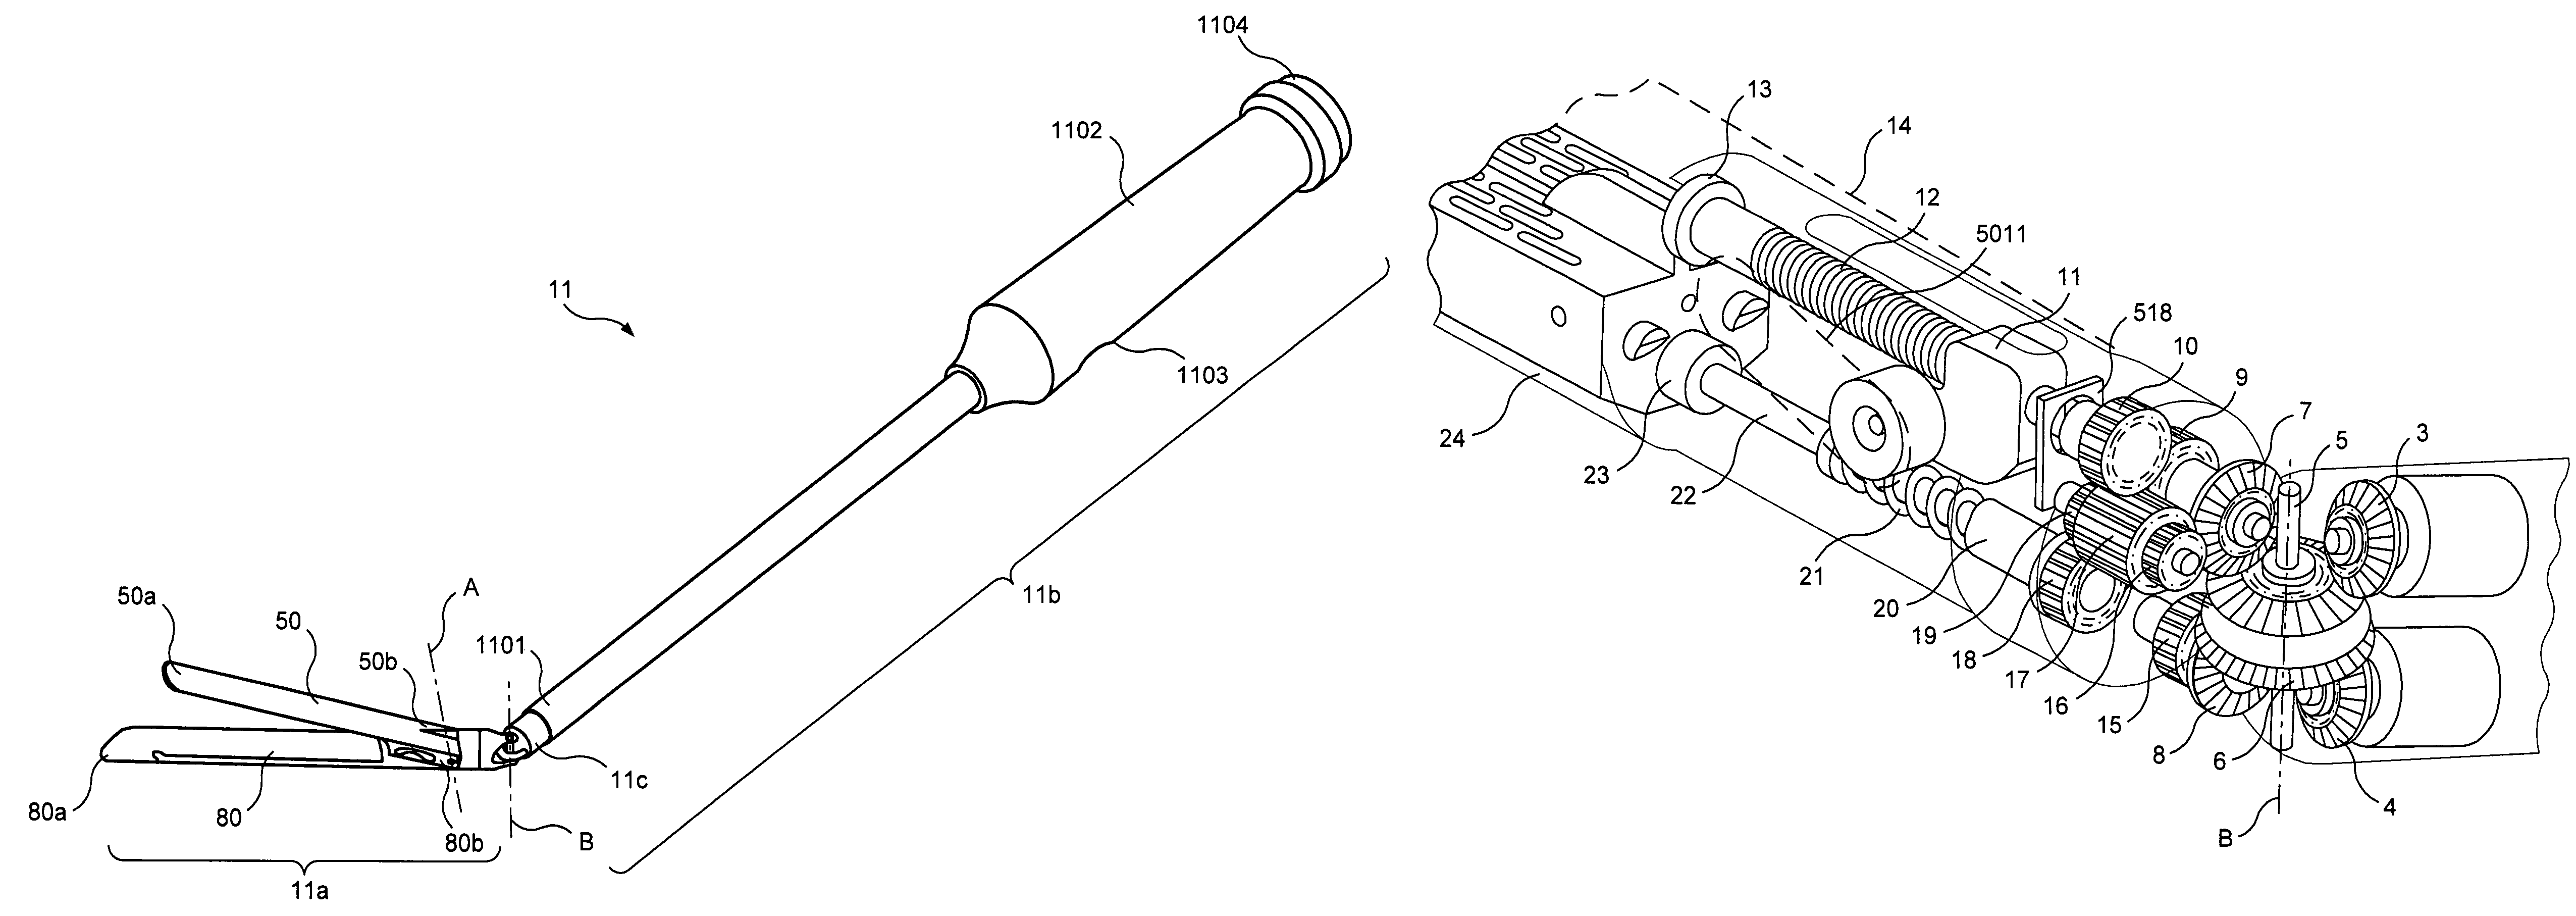 Surgical device having a rotatable jaw portion